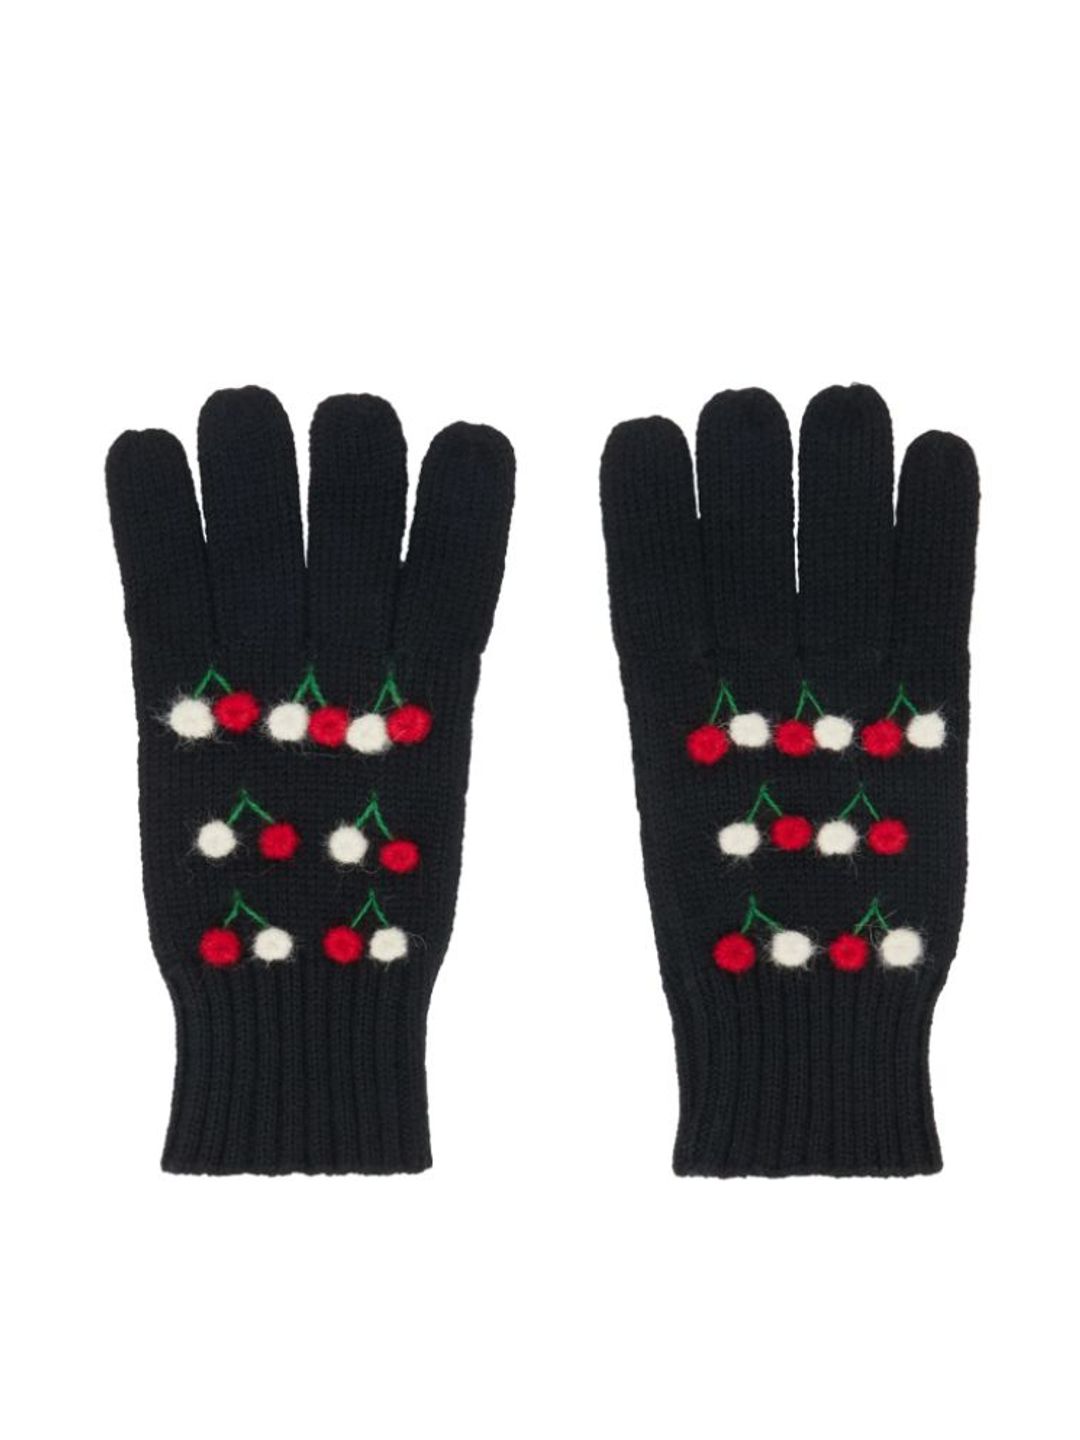 Black gloves with cherries 